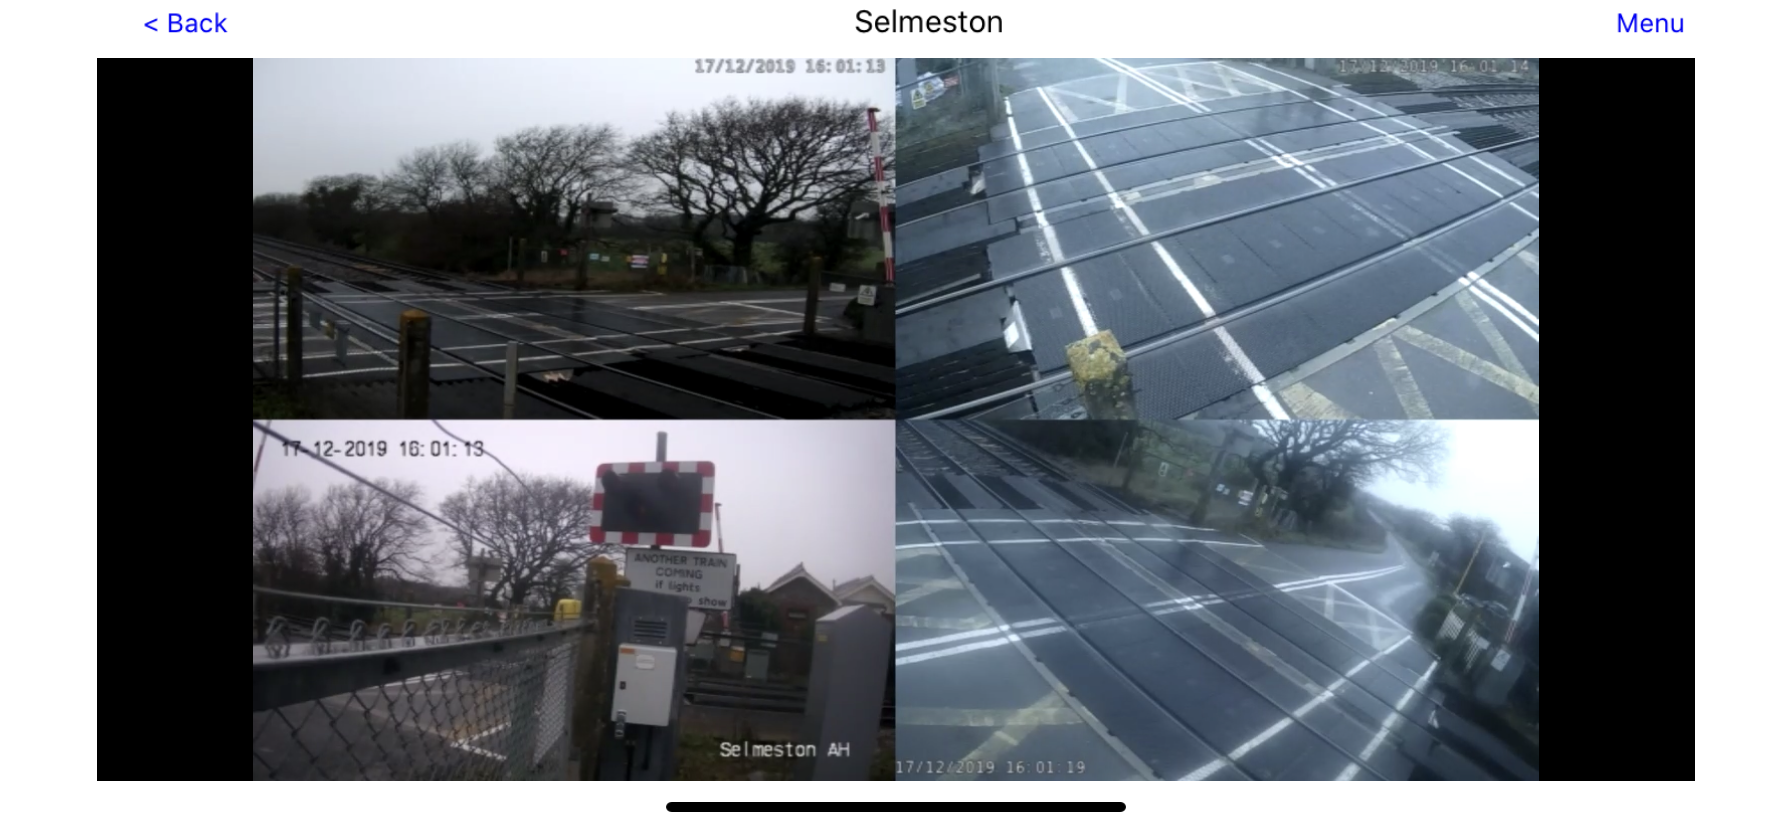 Level crossing CCTV systems